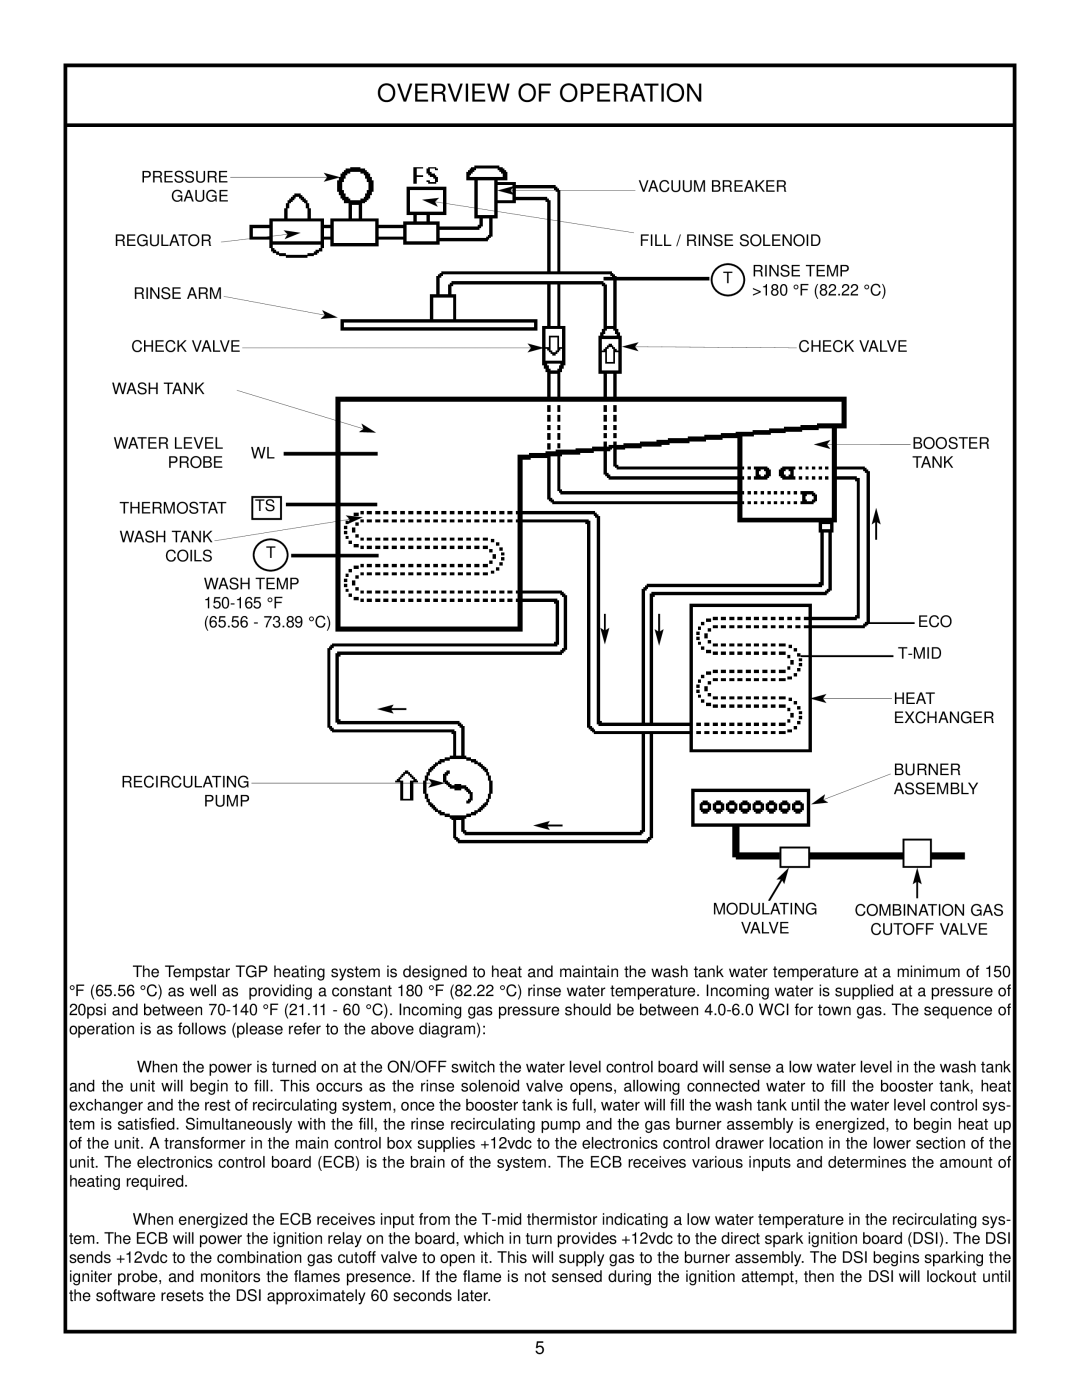 Jackson Tempstar TGP technical manual Overview Of Operation 